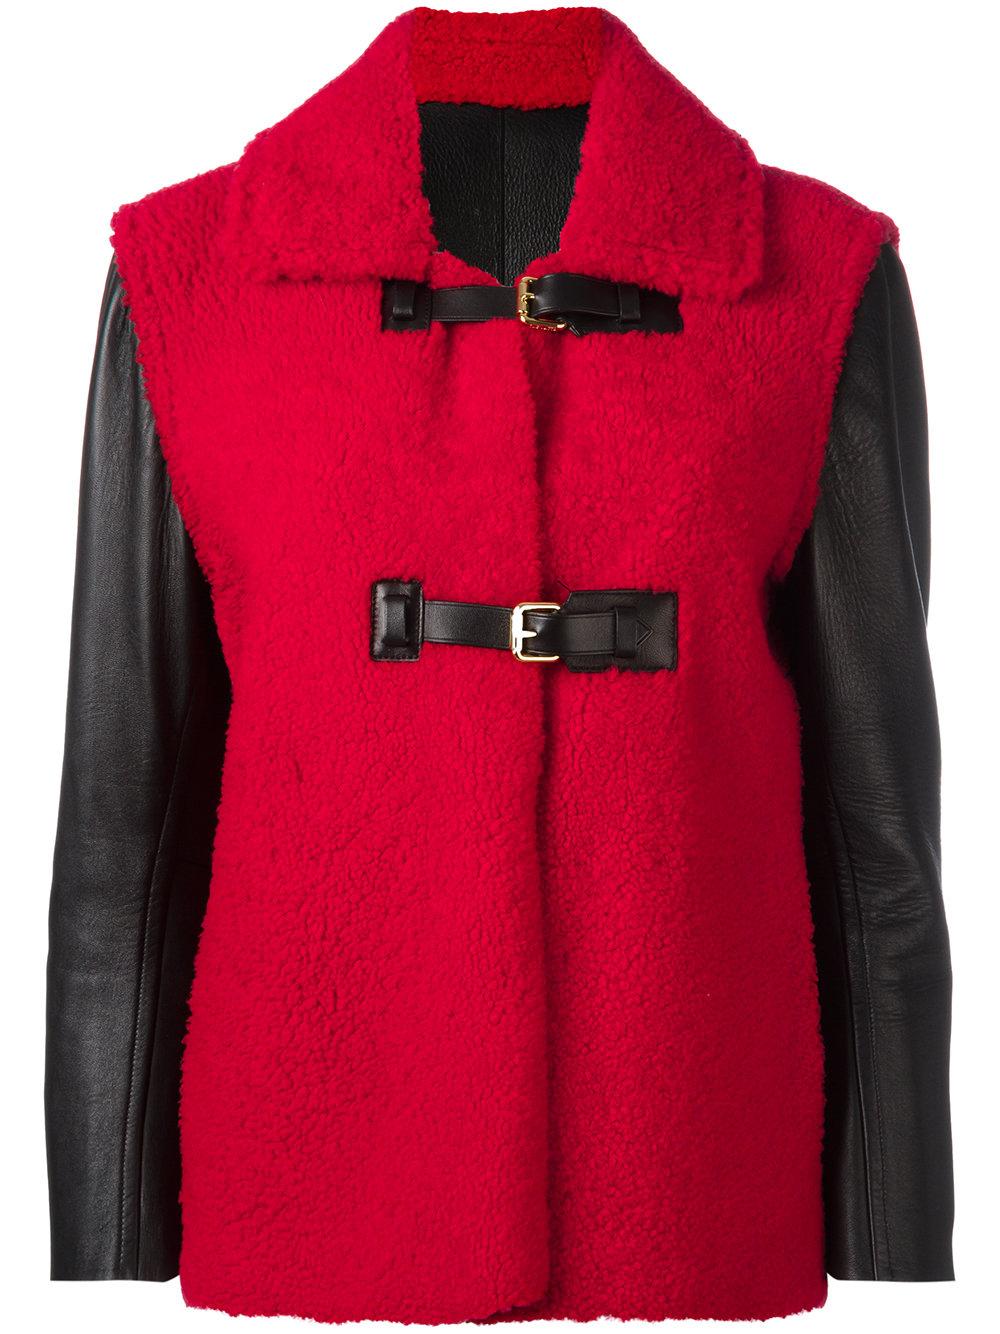 Louis Vuitton Buckled Shearling Jacket in Red - Lyst